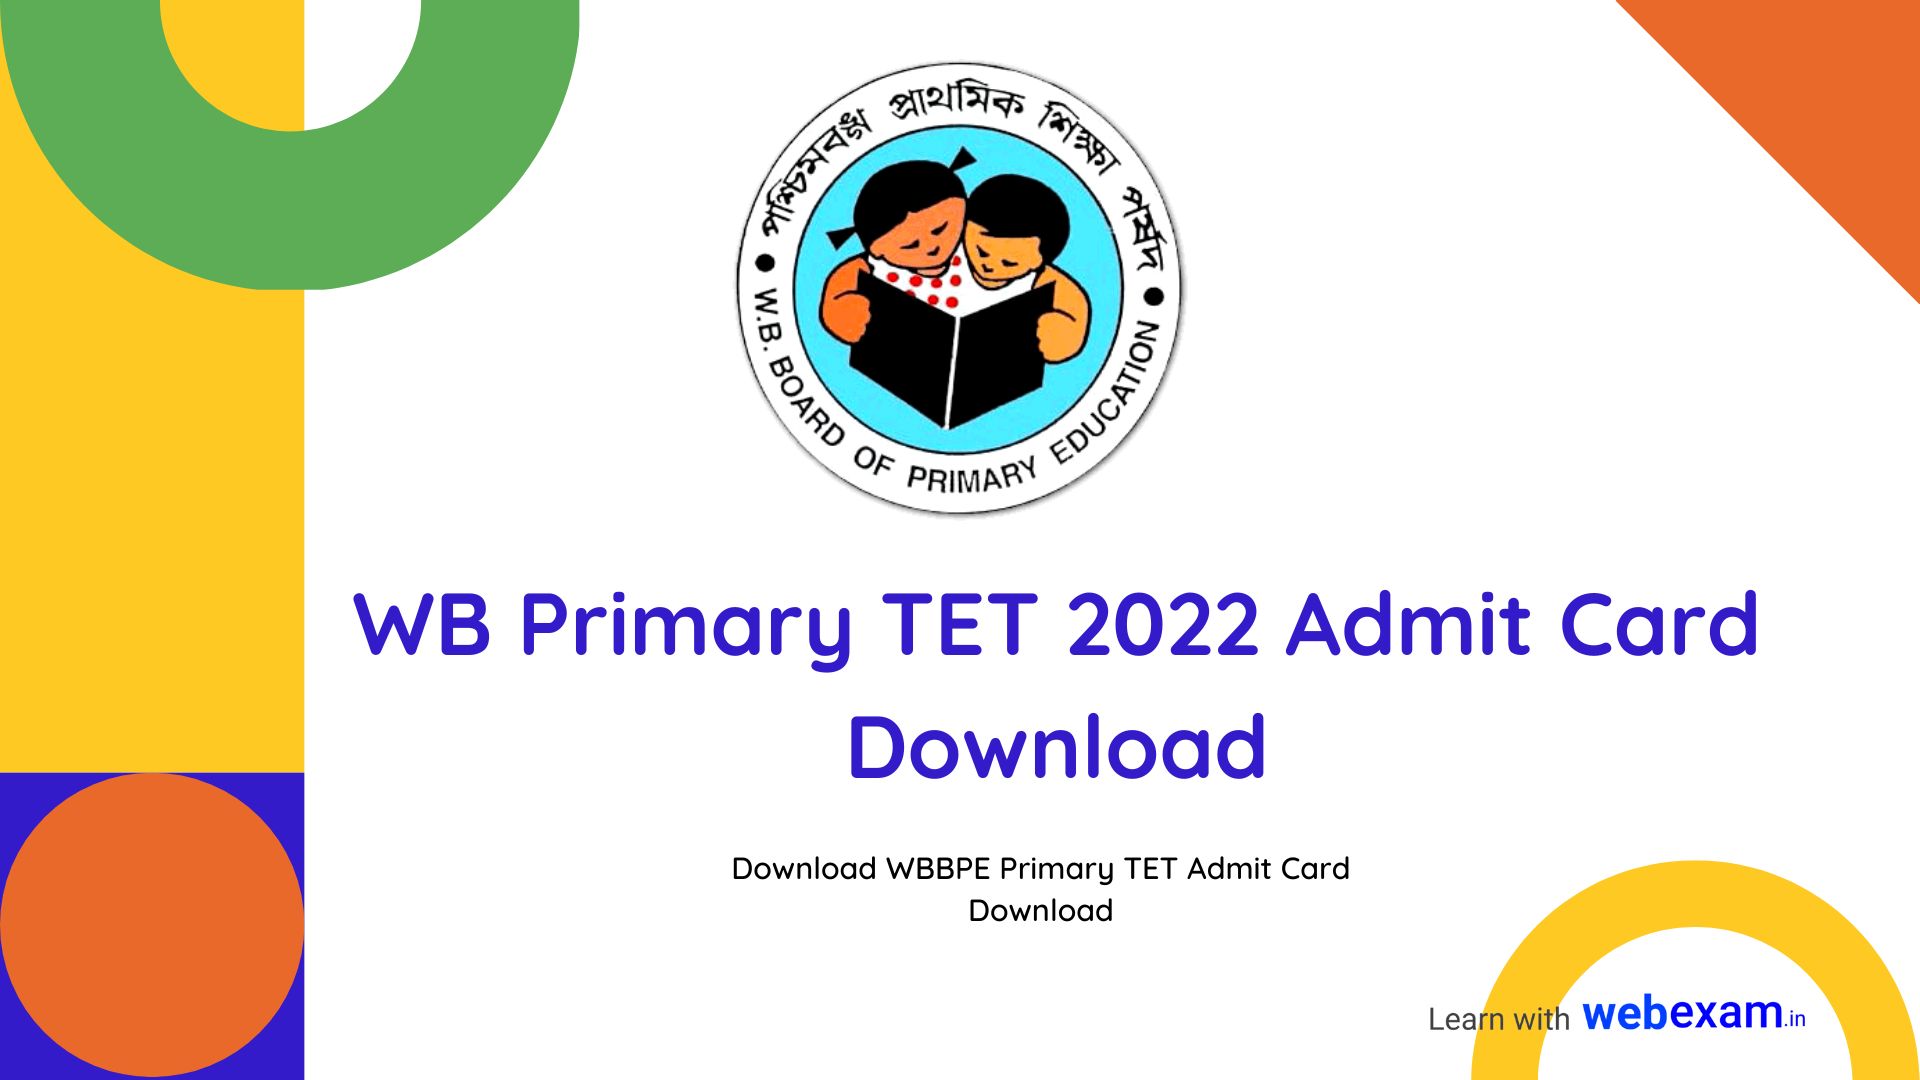 WB Primary TET 2022 Admit Card Download